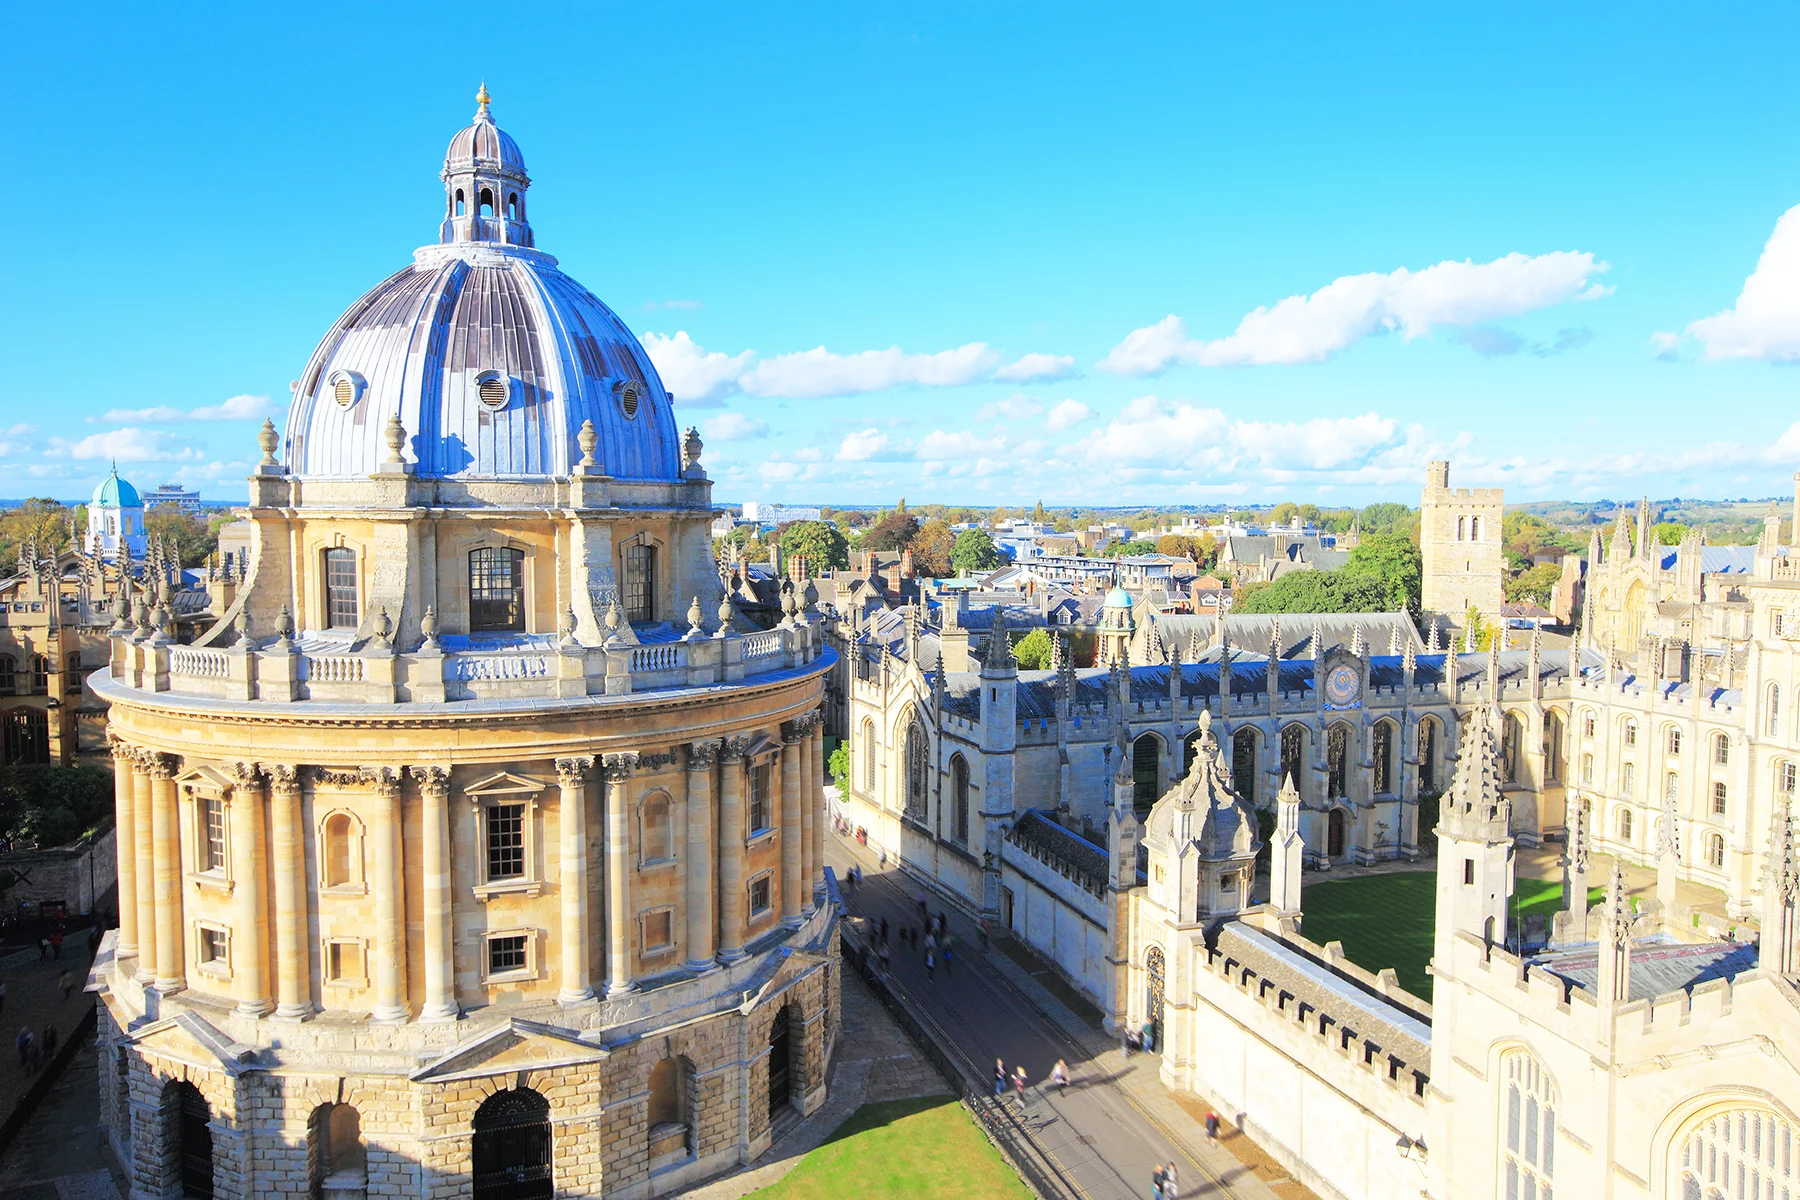 An Oxford chapel and college viewed from above